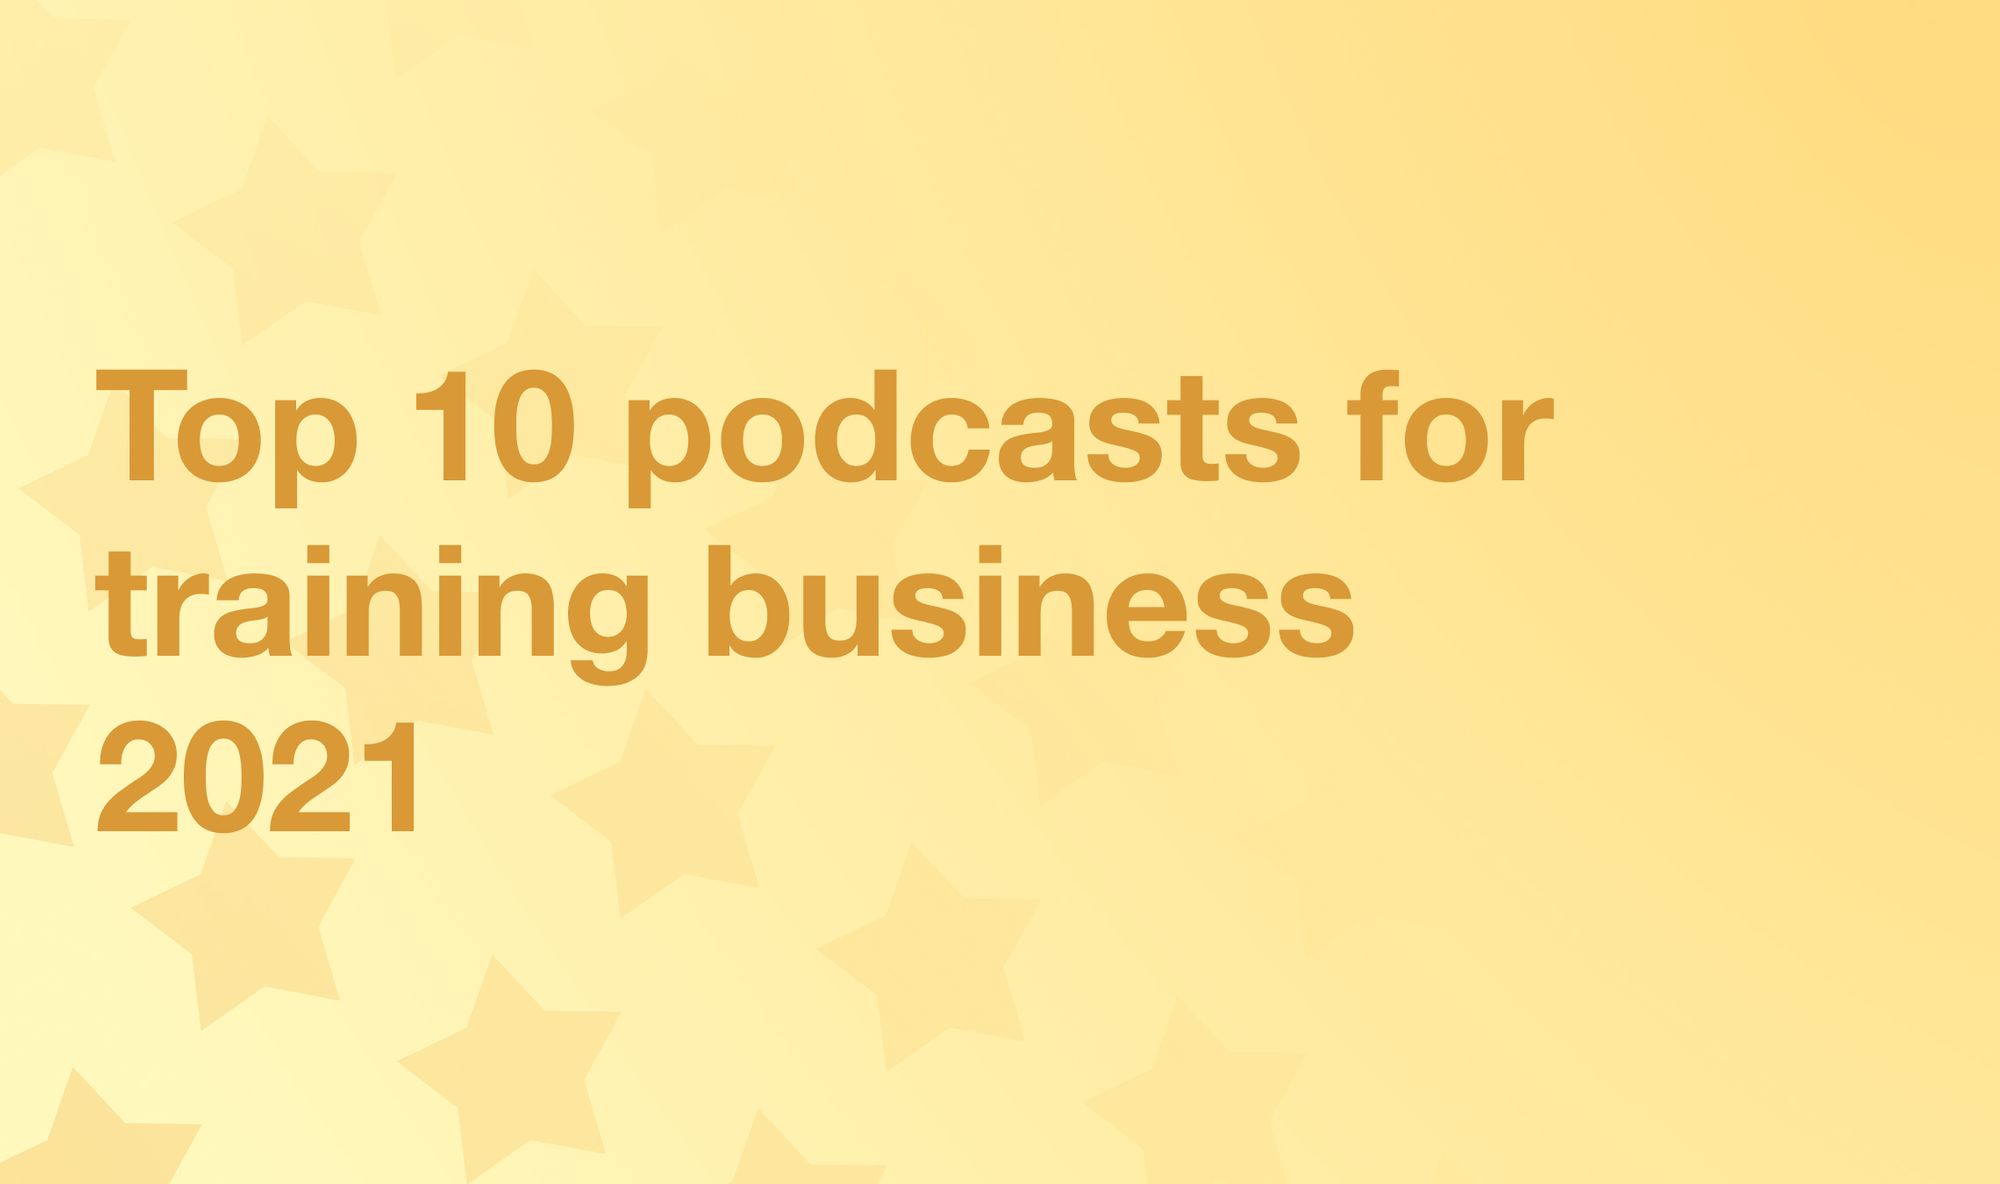 Top 10 podcasts for training business 2021